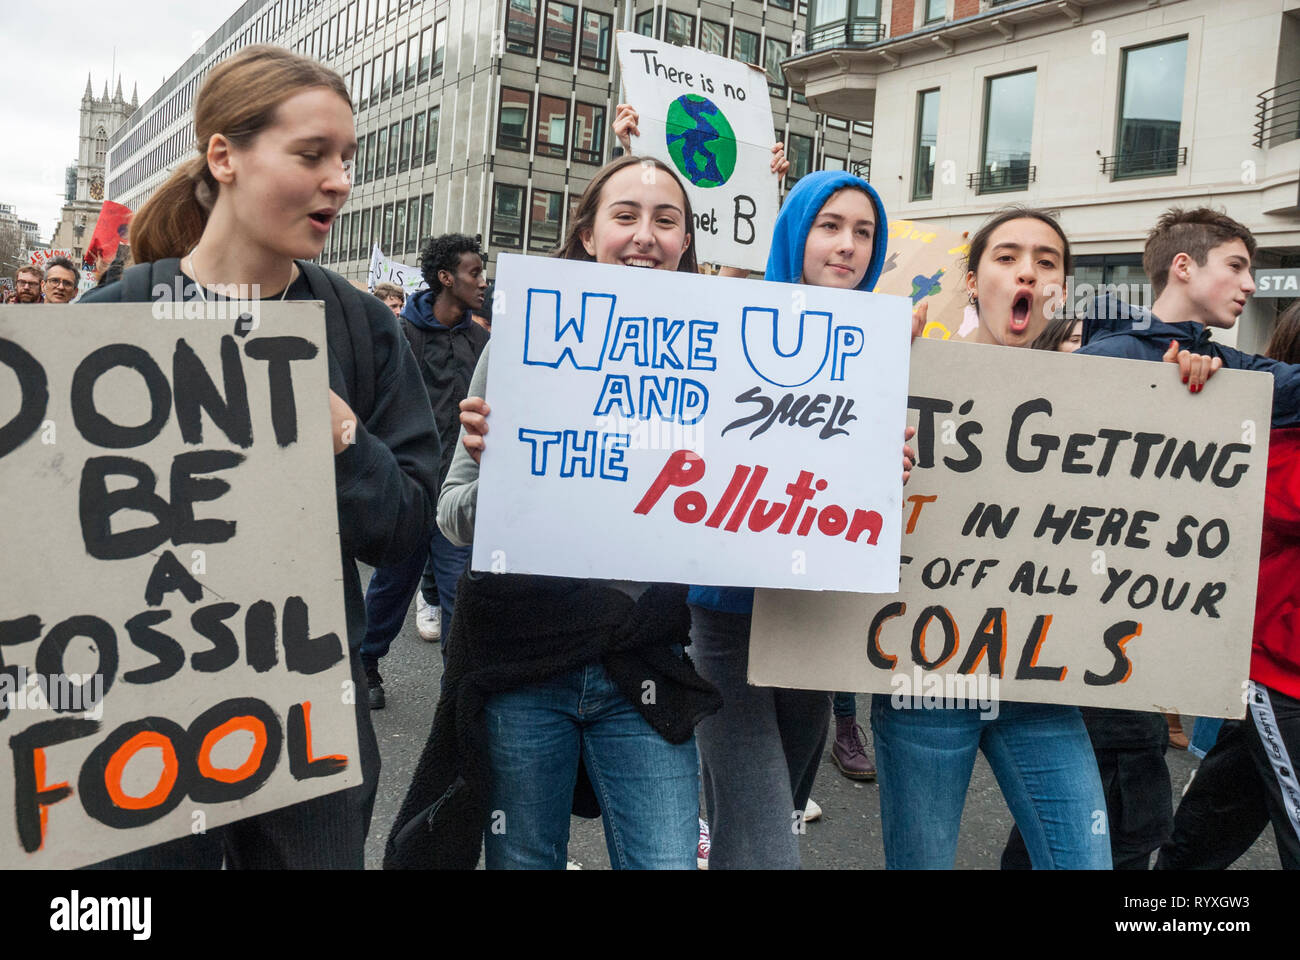 London, UK. 15th March, 2019. School students campaigning against climate change protest outside Parliament. Credit: Maggie sully/Alamy Live News. School children on strike to protest at climate change rally outside Parliament, London. Four young women singing and shouting about climate justice and global warming with homemade posters 'Wake ups and smell the pollution', 'Don't a fossil FOOL', and 'Its getting hot in here so take off all your COALS'.  Part of the worldwide 'FridaysforFuture' protest. Stock Photo